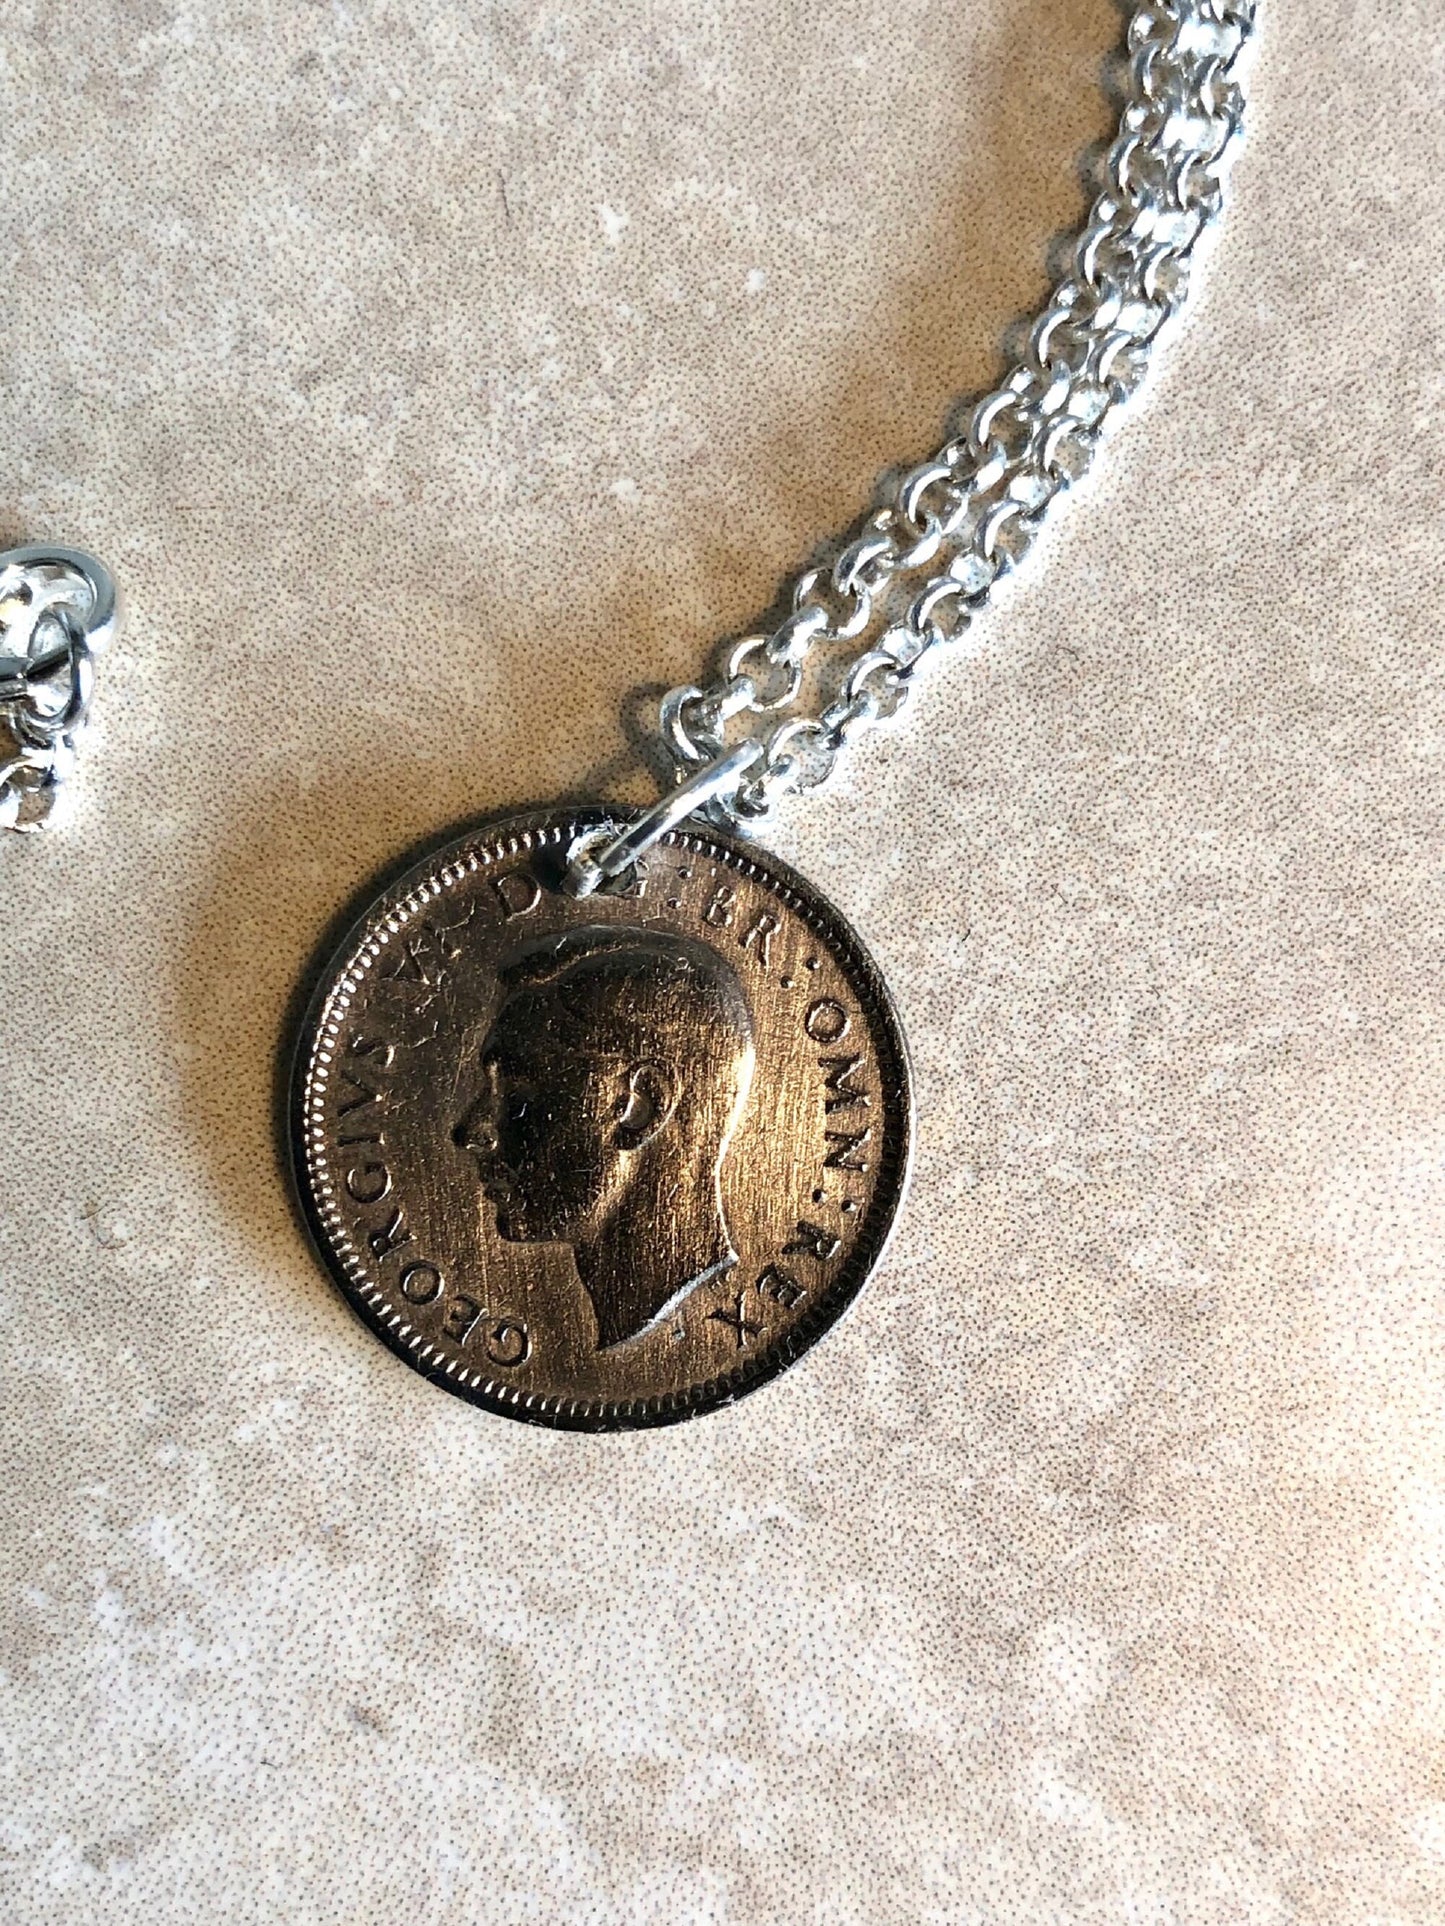 Britain Pendant Coin Necklace 6 Pence Sixpence United Kingdom Personal Jewelry Gift Friend Charm For Him Her World Coin Collector